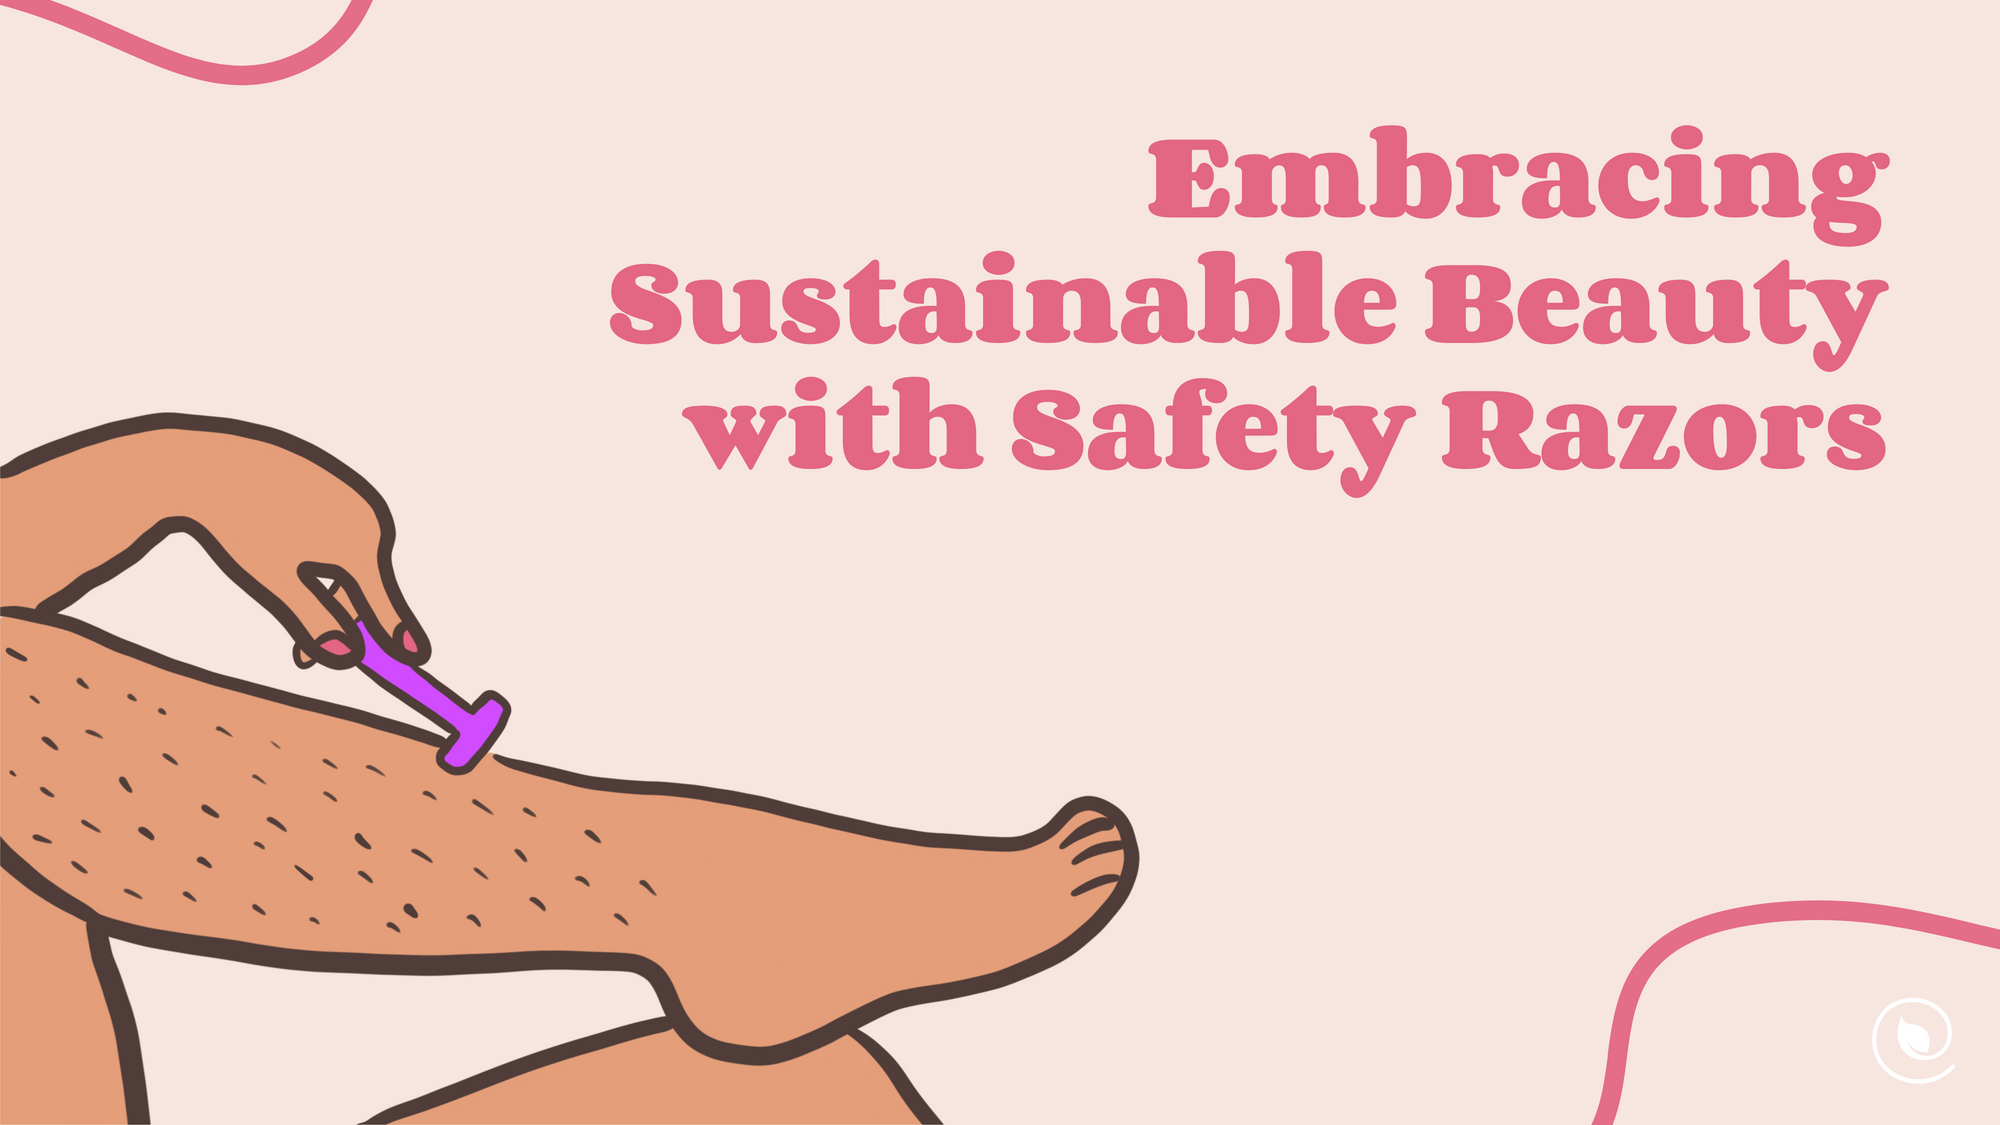 Embracing Sustainable Beauty with Safety Razors